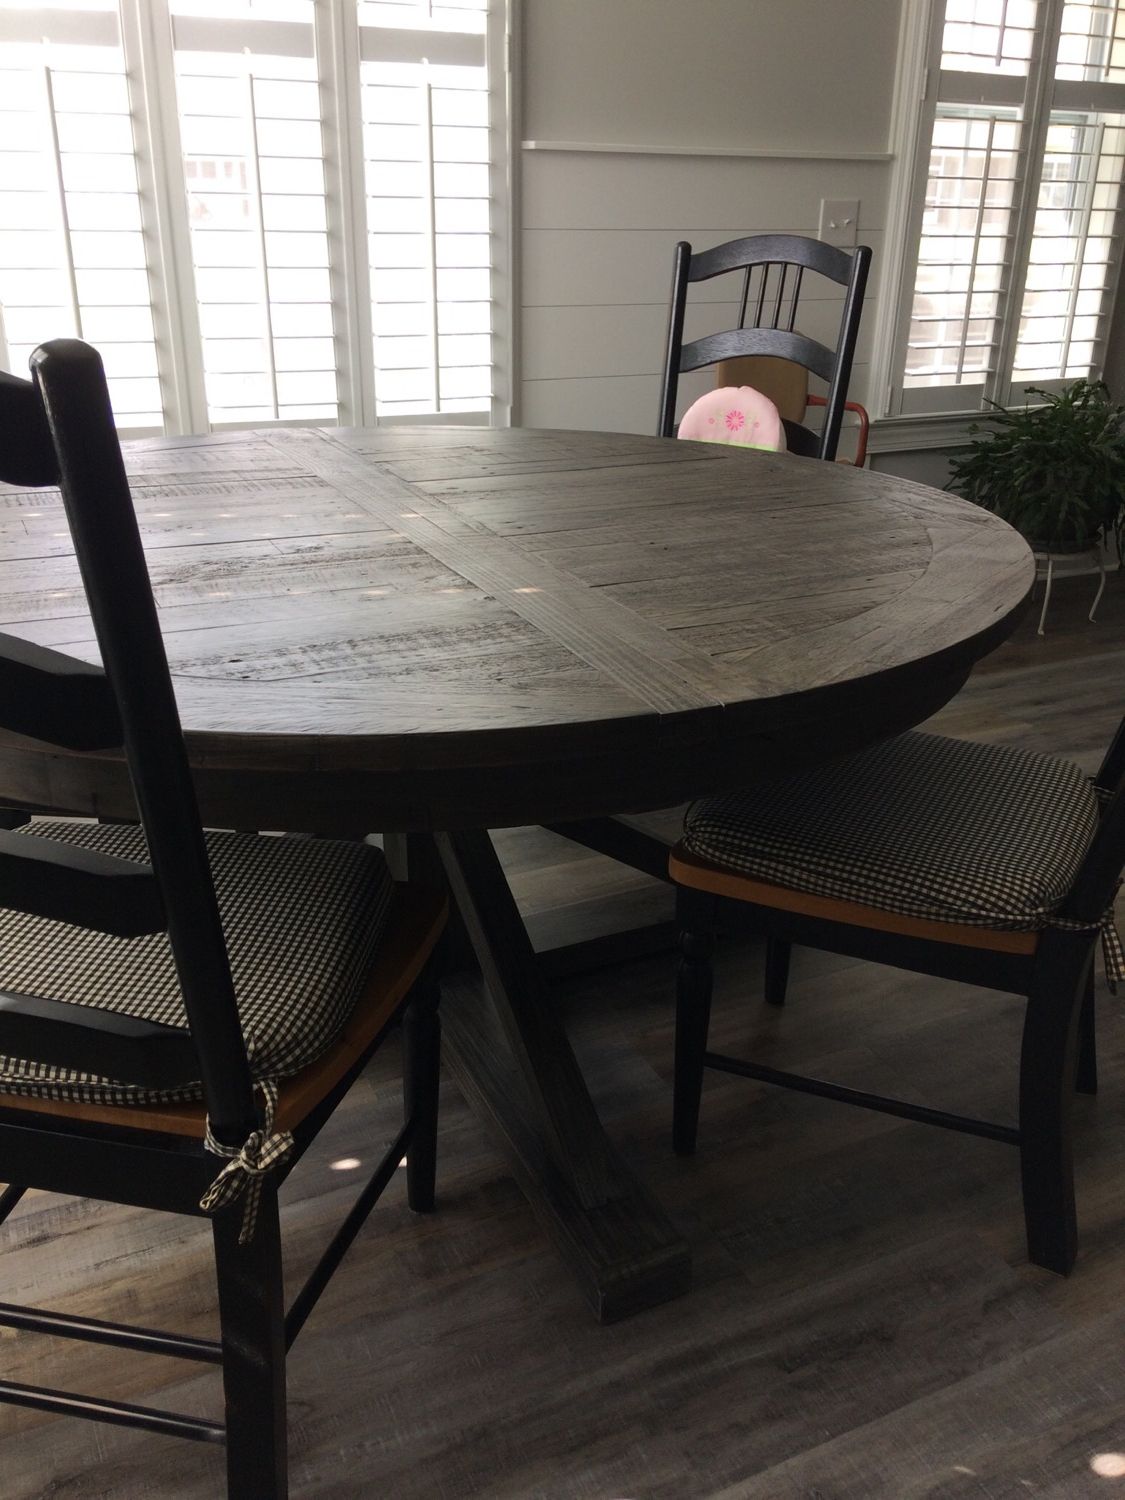 Black Olive Hart Reclaimed Pedestal Extending Dining Tables With Regard To Preferred Cintra Reclaimed Wood Extending Round Dining Table 63" (View 10 of 25)